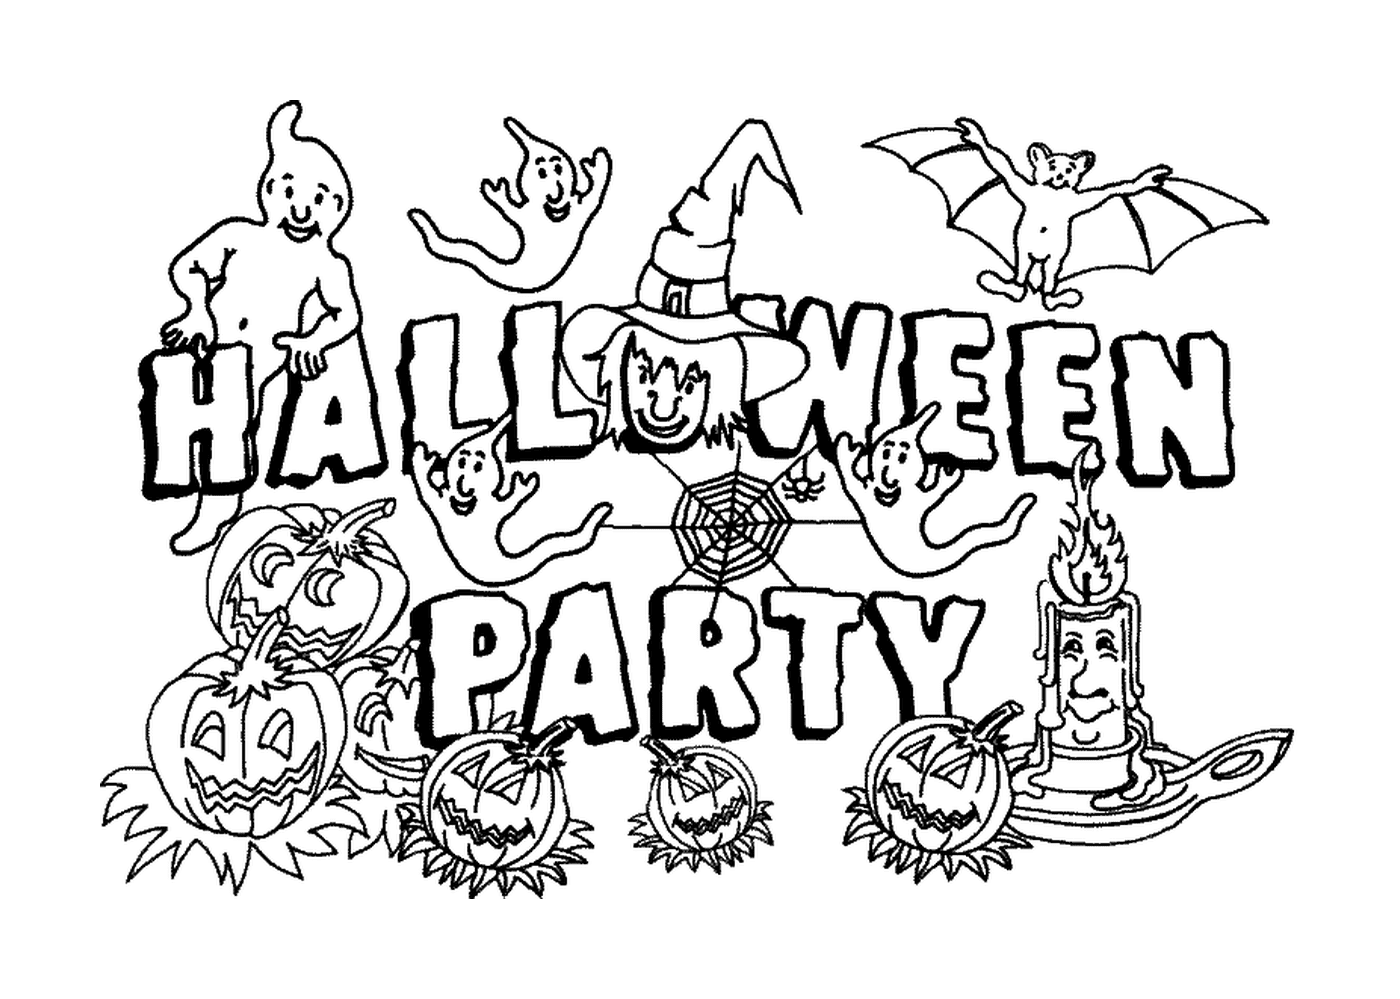  Halloween party with pumpkins and ghosts 